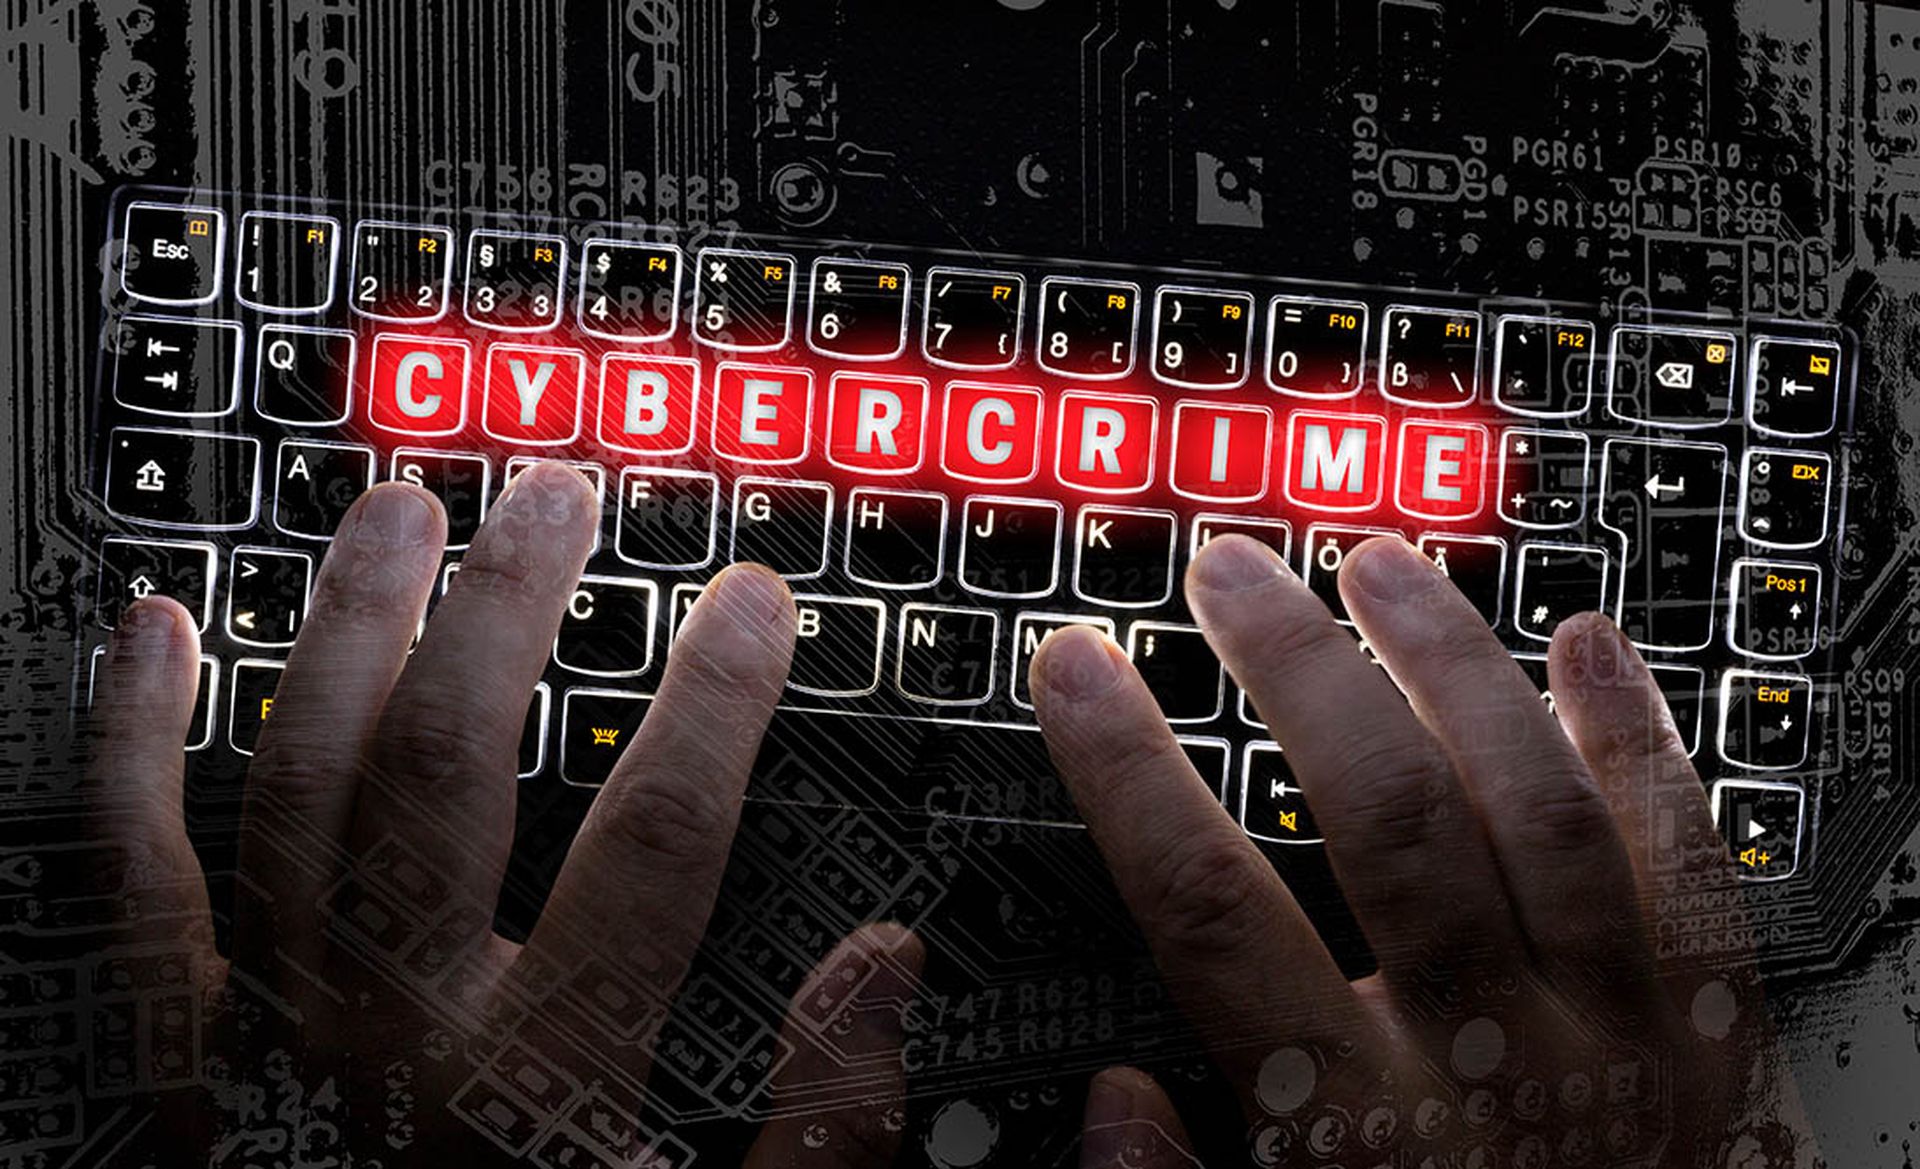 The word "cybercrime" is illuminated in a red on a computer keyboard